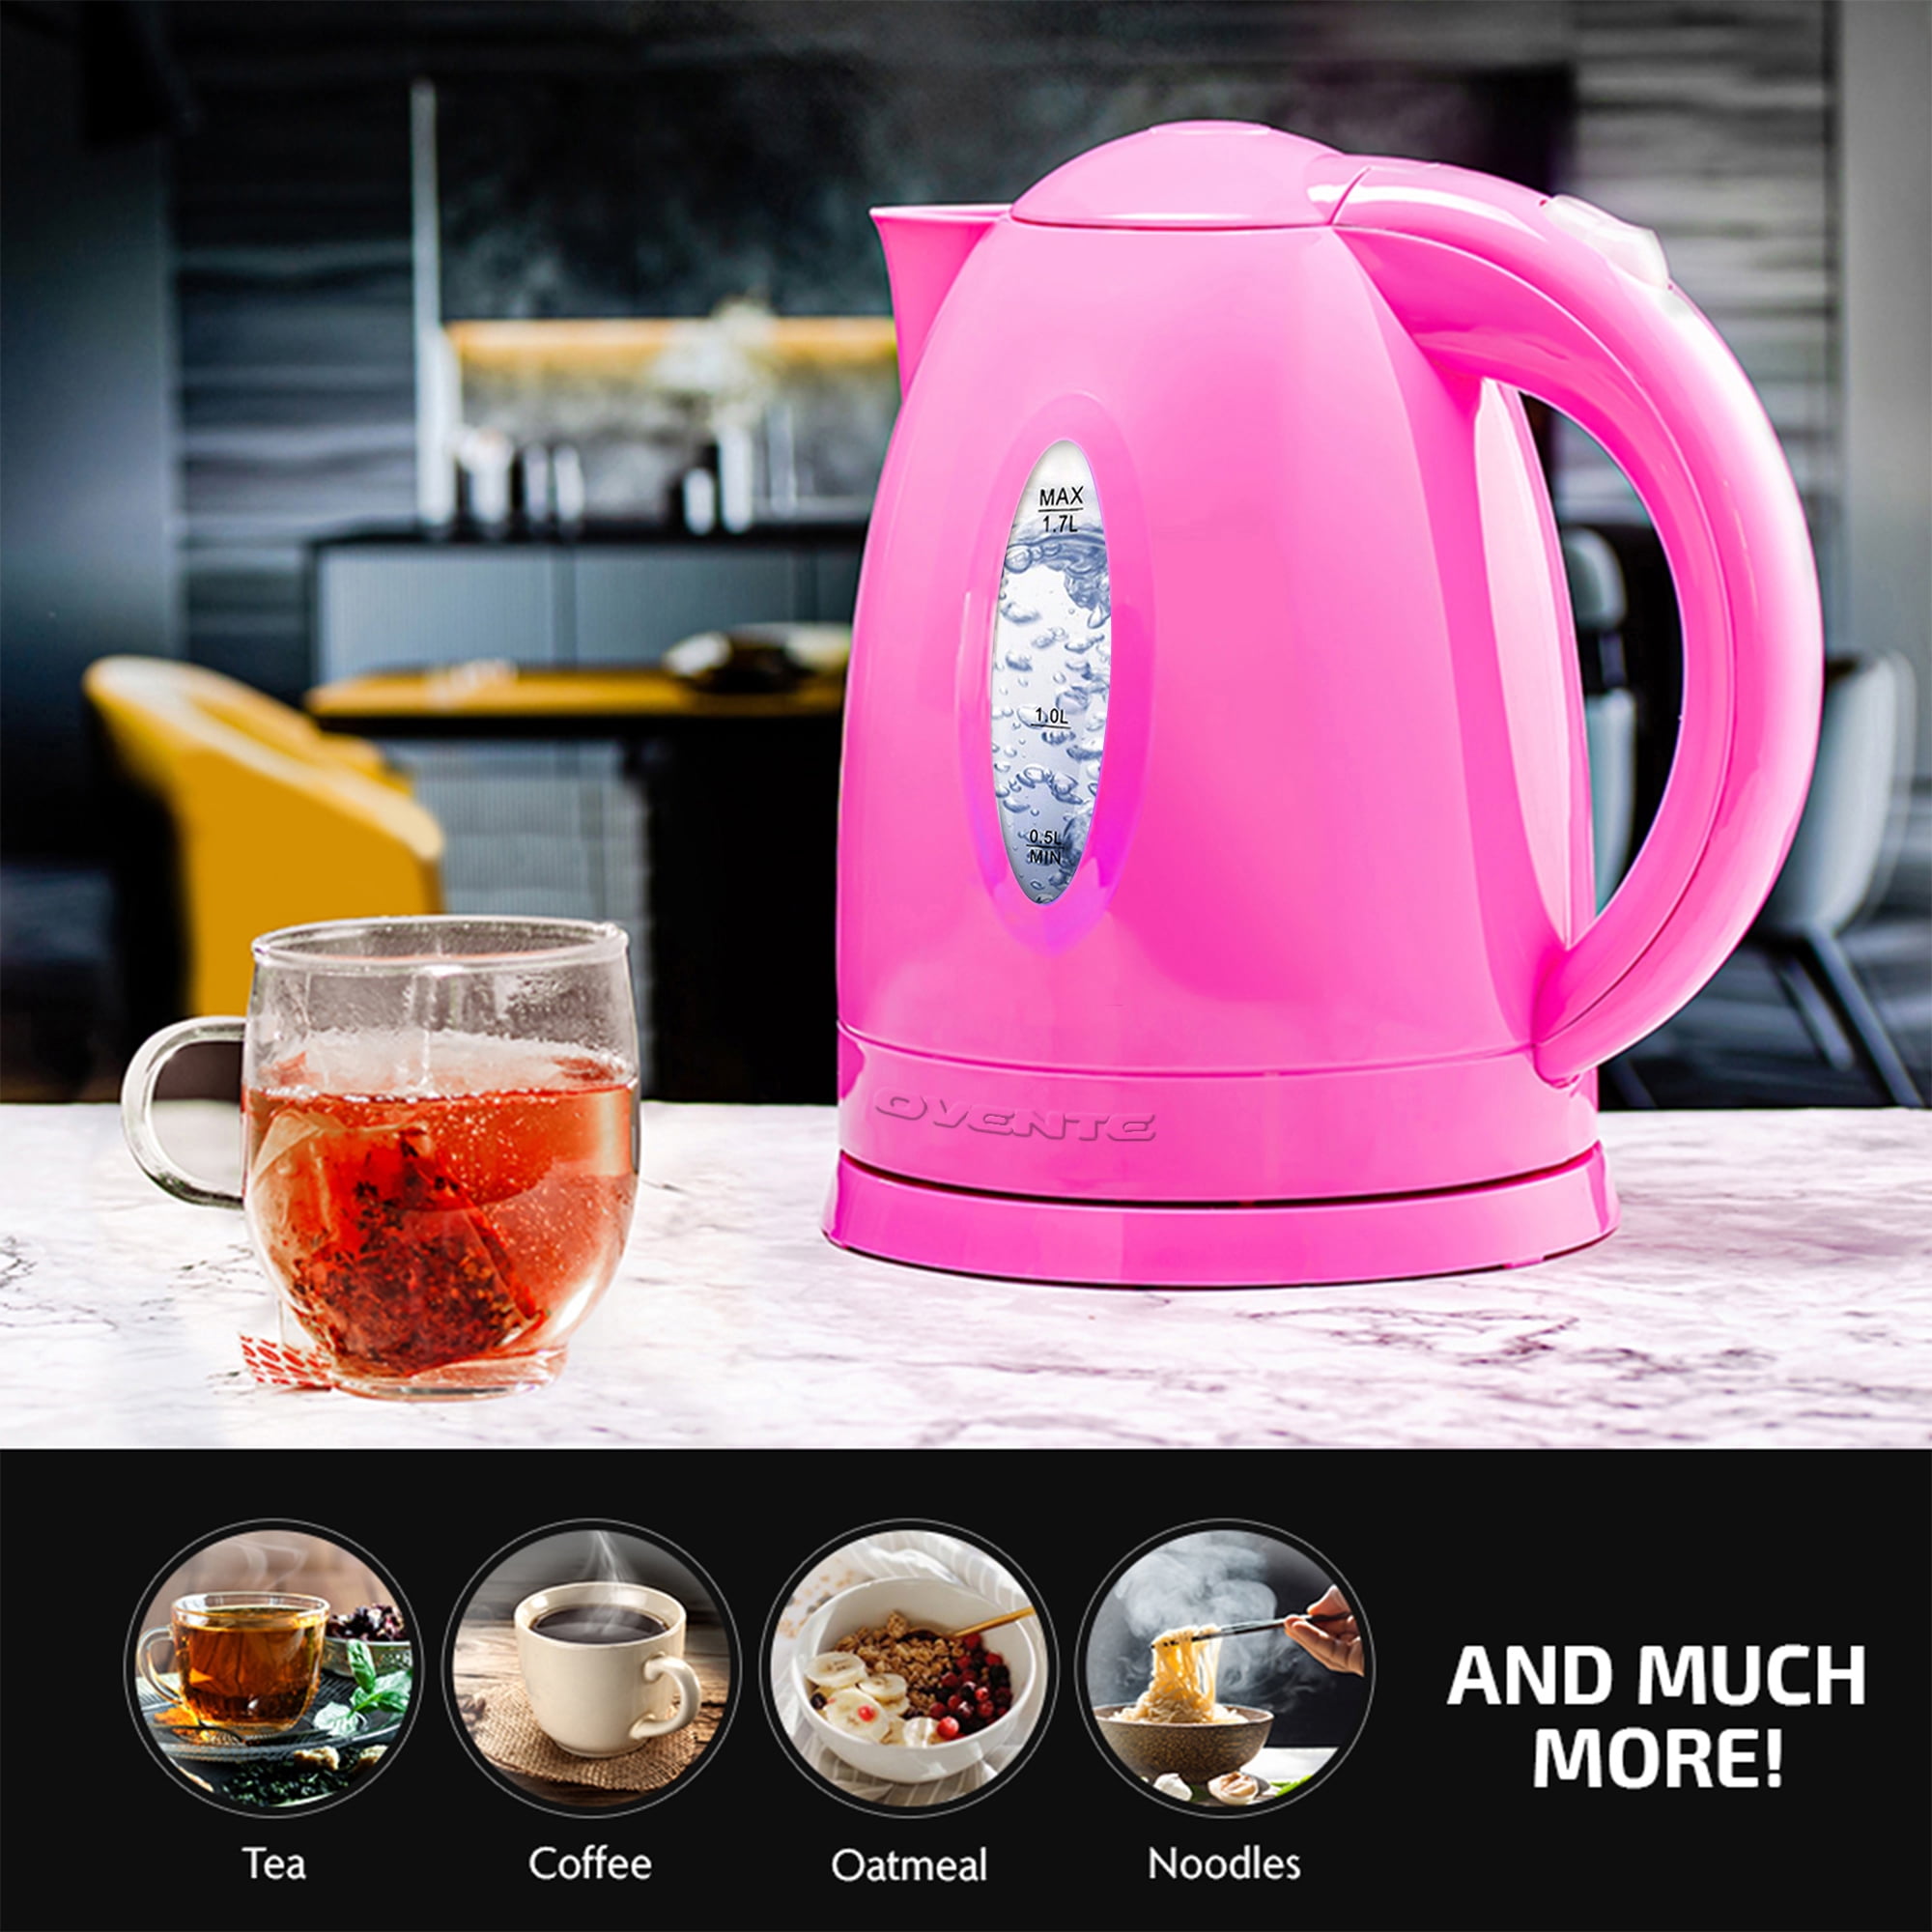 OVENTE Glass Electric Kettle Hot Water Boiler 1.7 Liter ProntoFill Tech w/  Stainless Steel Filter - 1500W BPA Free Cordless Instant Water Heater